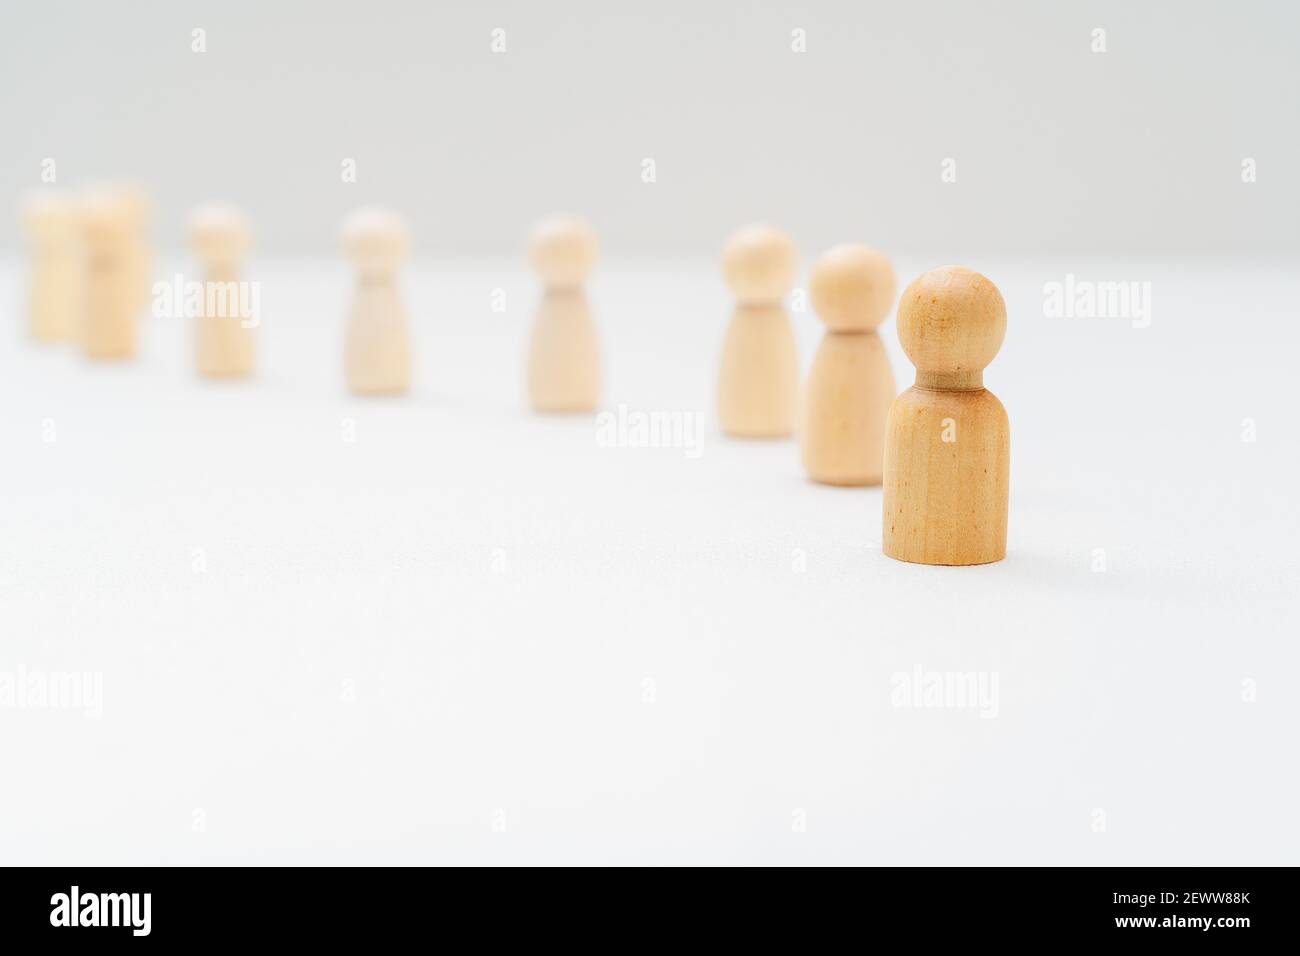 Follow The Leader. Wooden Peg Dolls Leader and Followers. Leadership Concept. Stock Photo